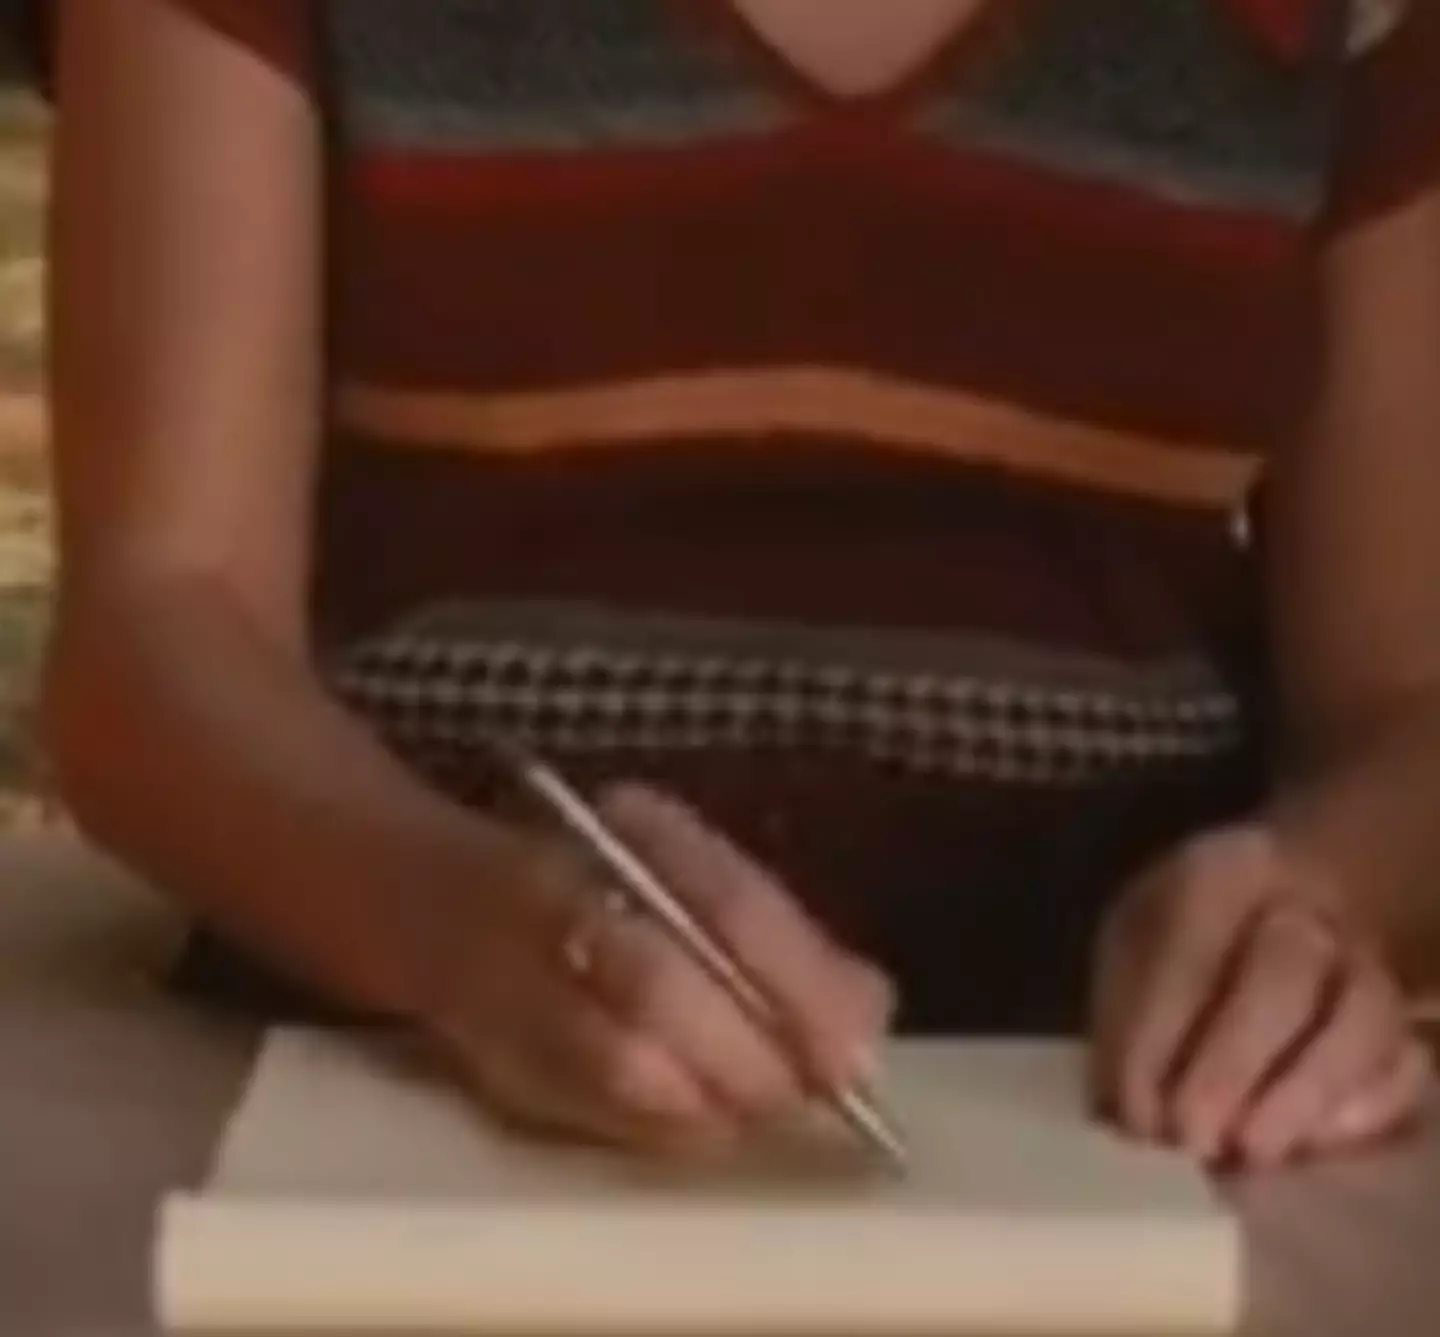 The way Taylor Swift holds a pen has left people distributed.